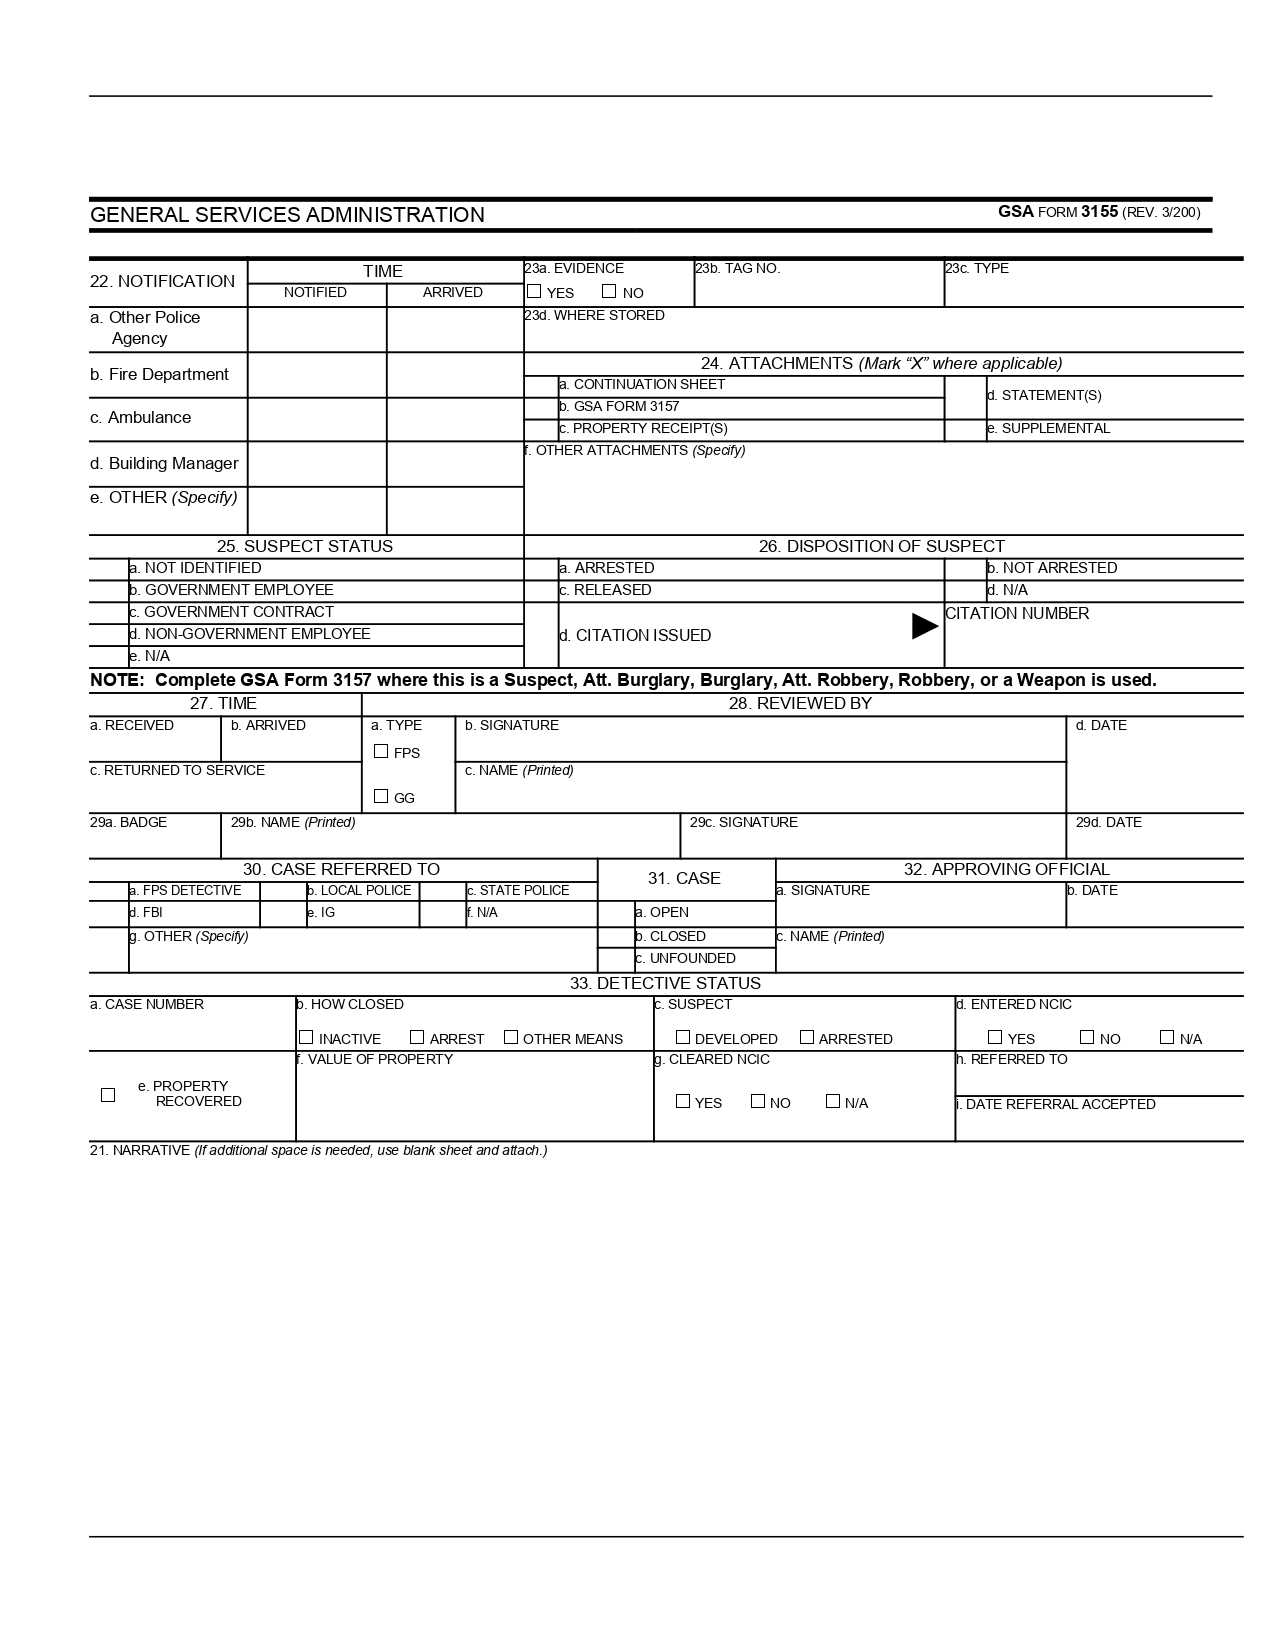 Blank Police Report Template